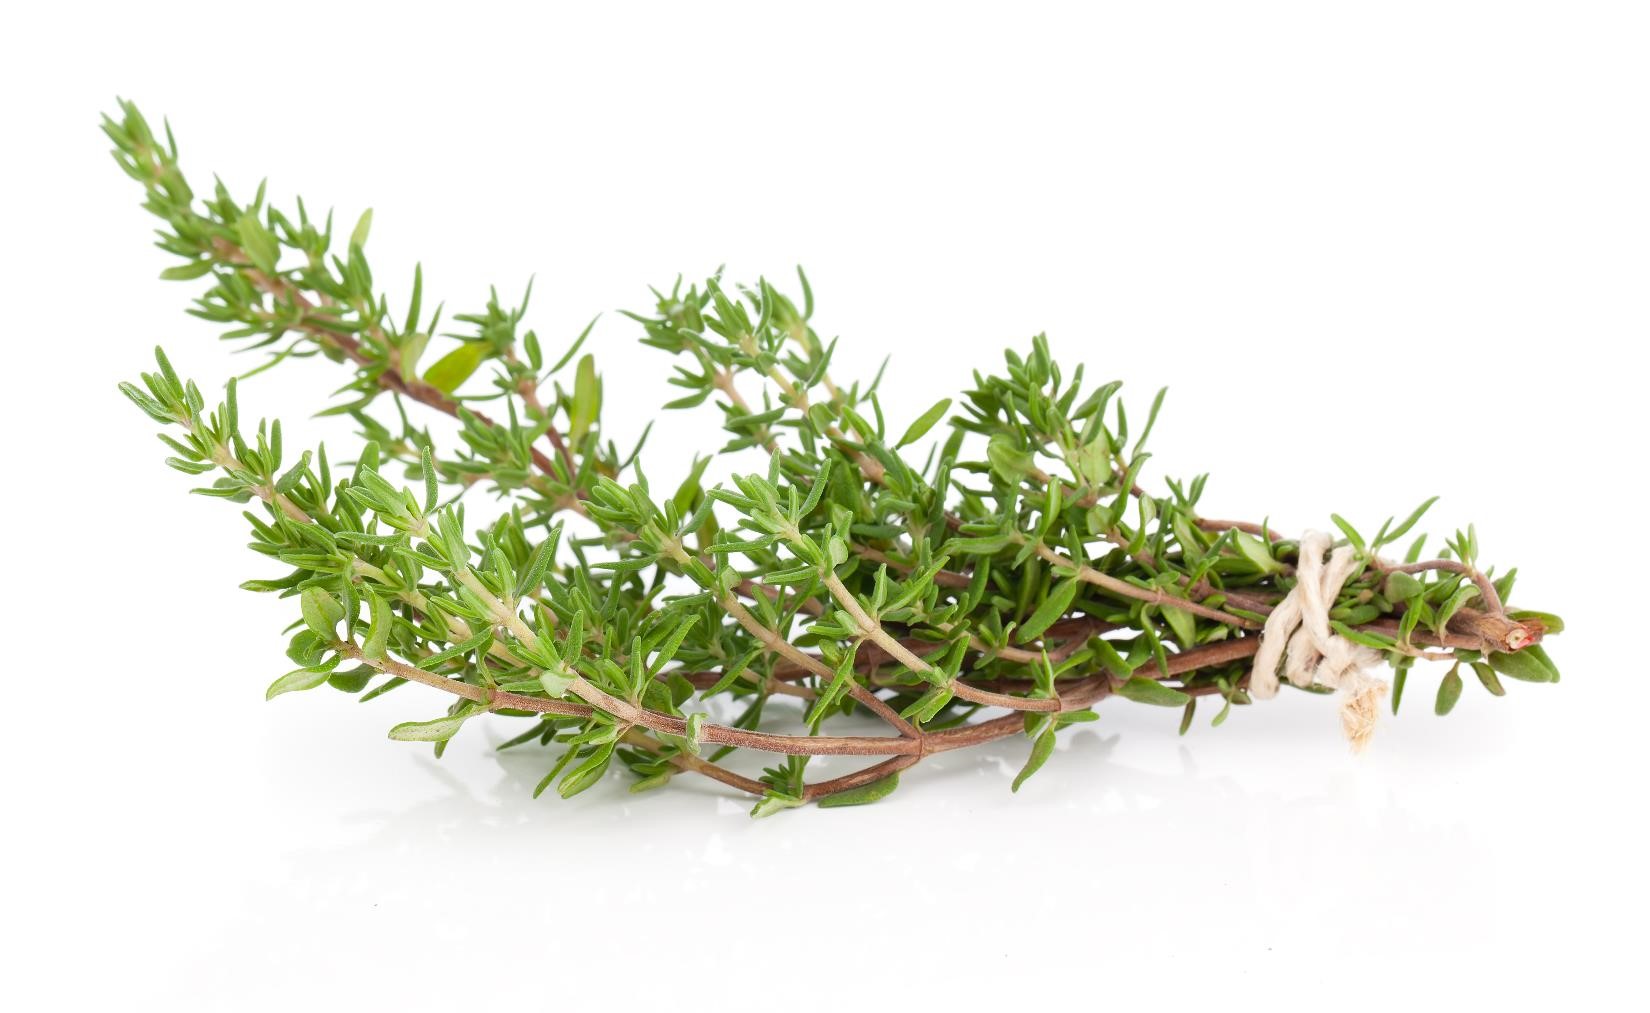 FIND OUT MORE ABOUT THYME